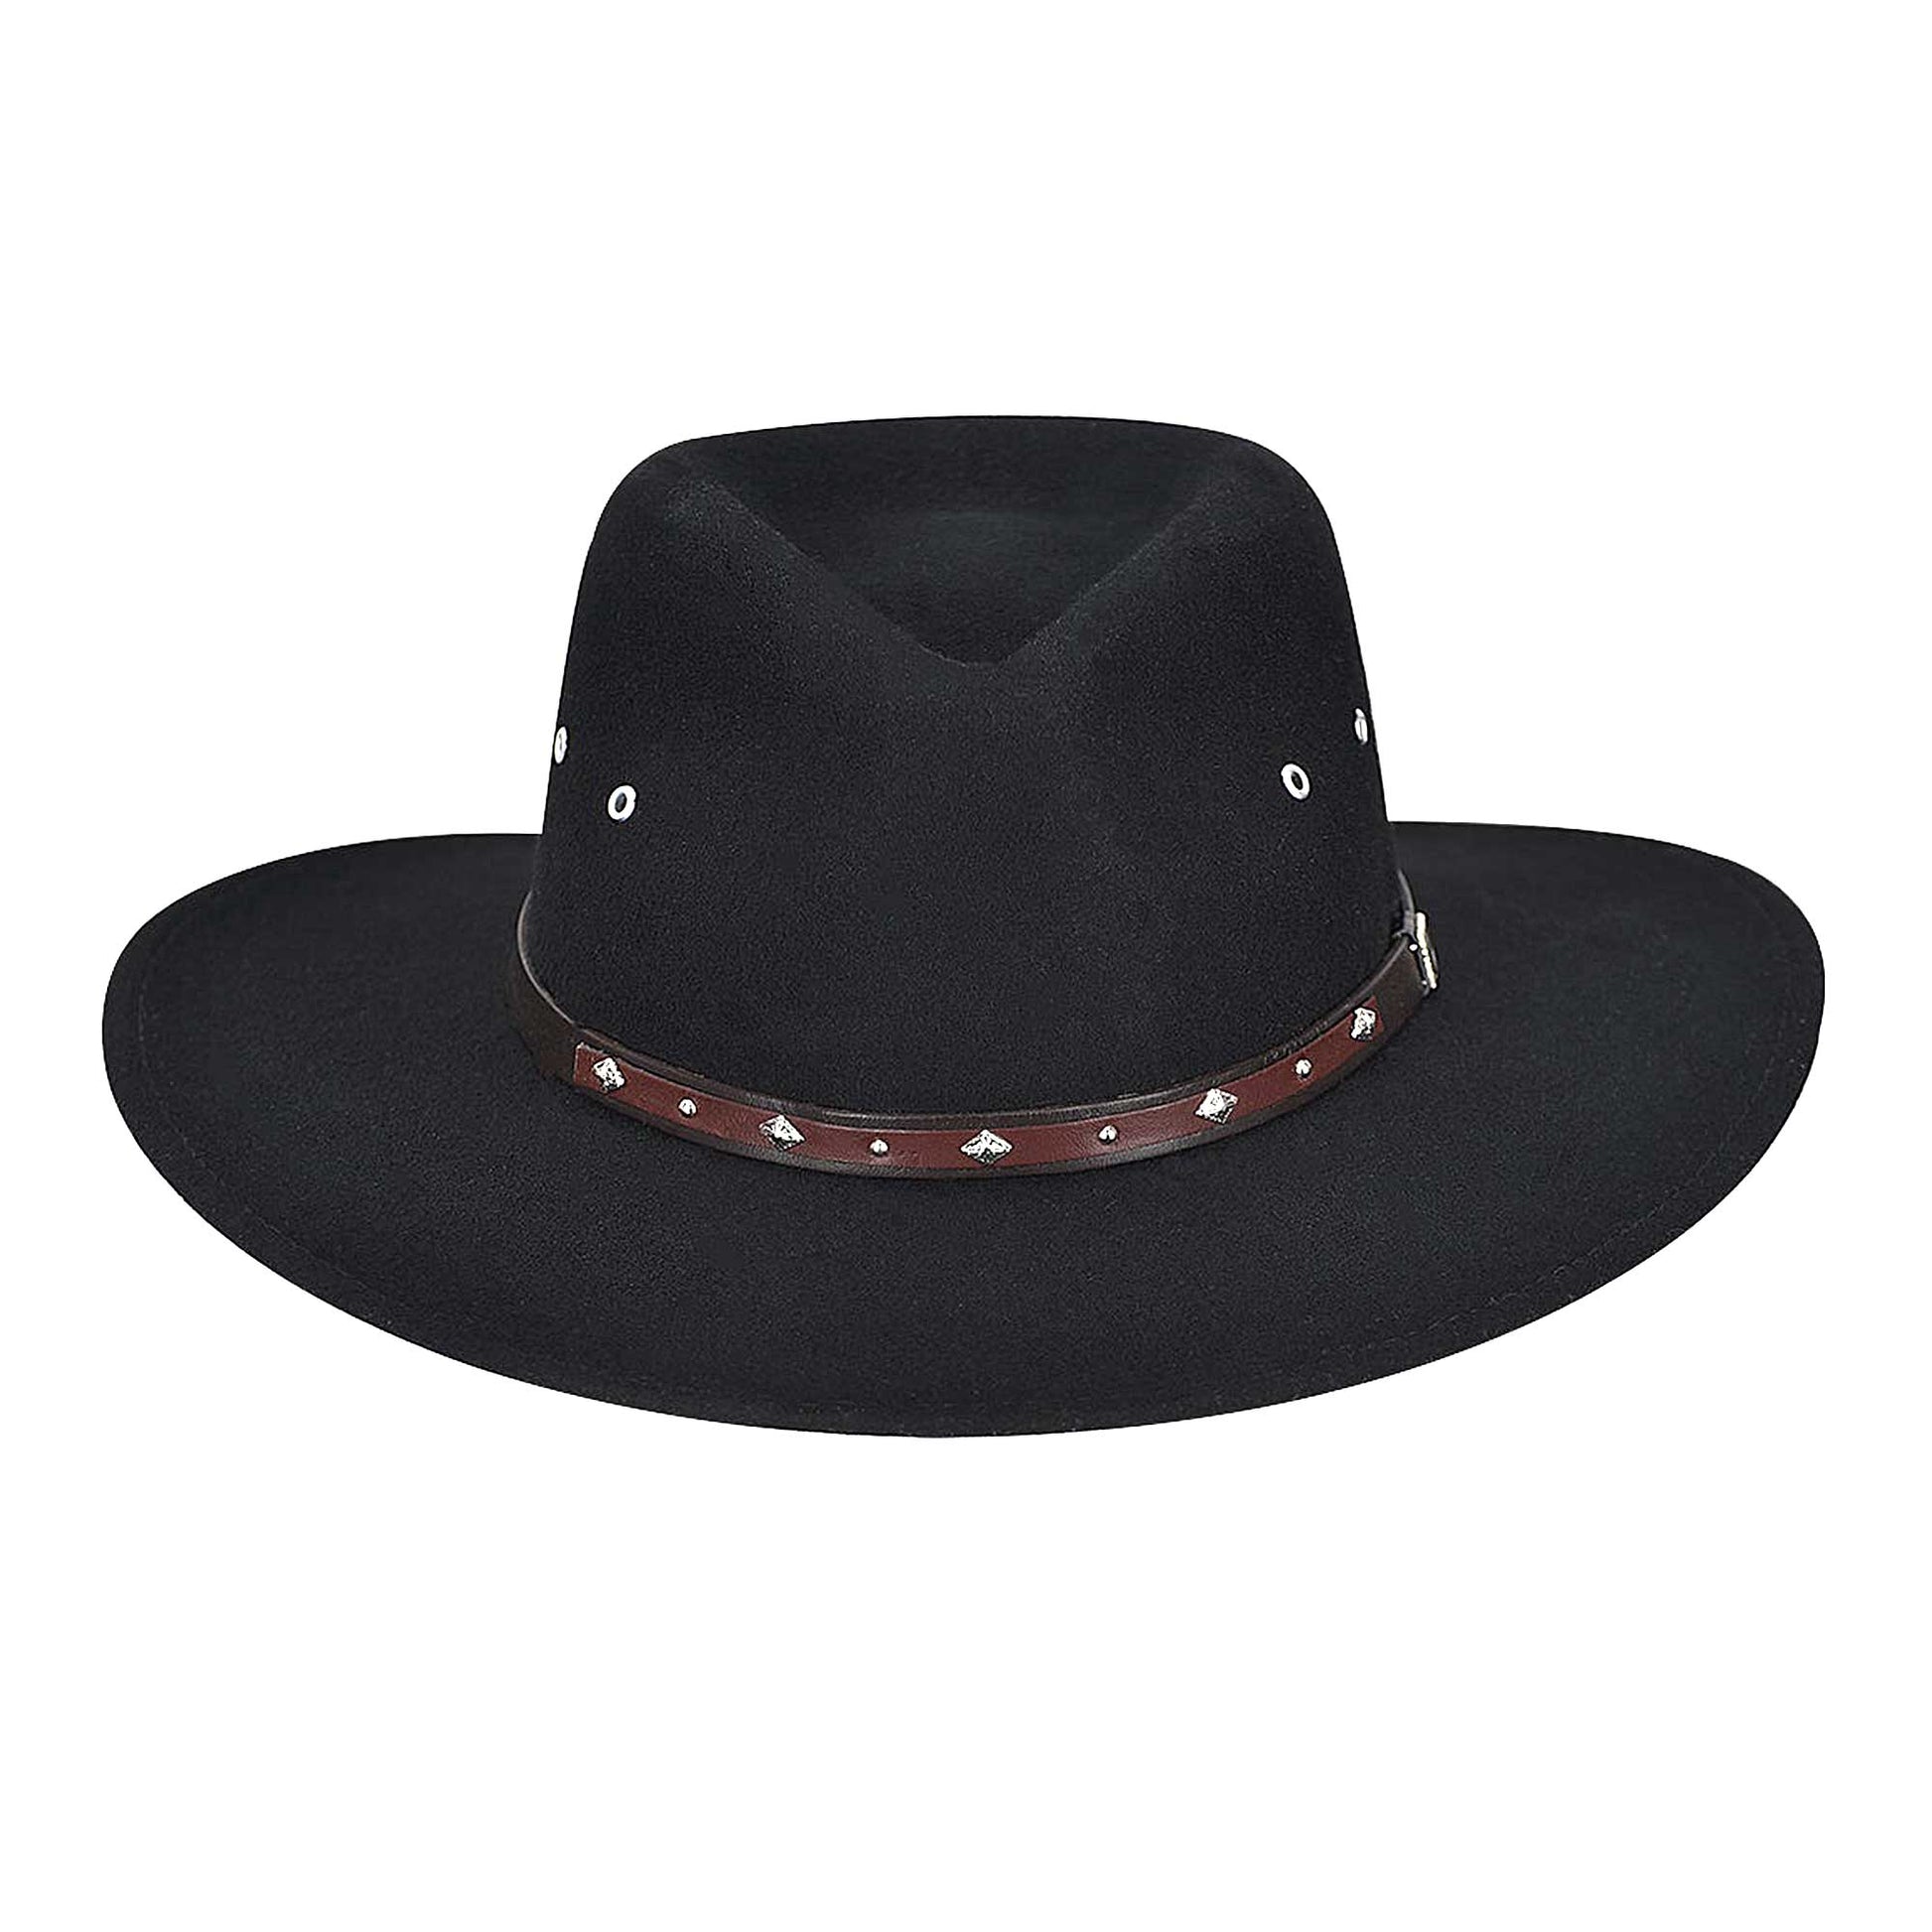 Black wool hat with leather belt